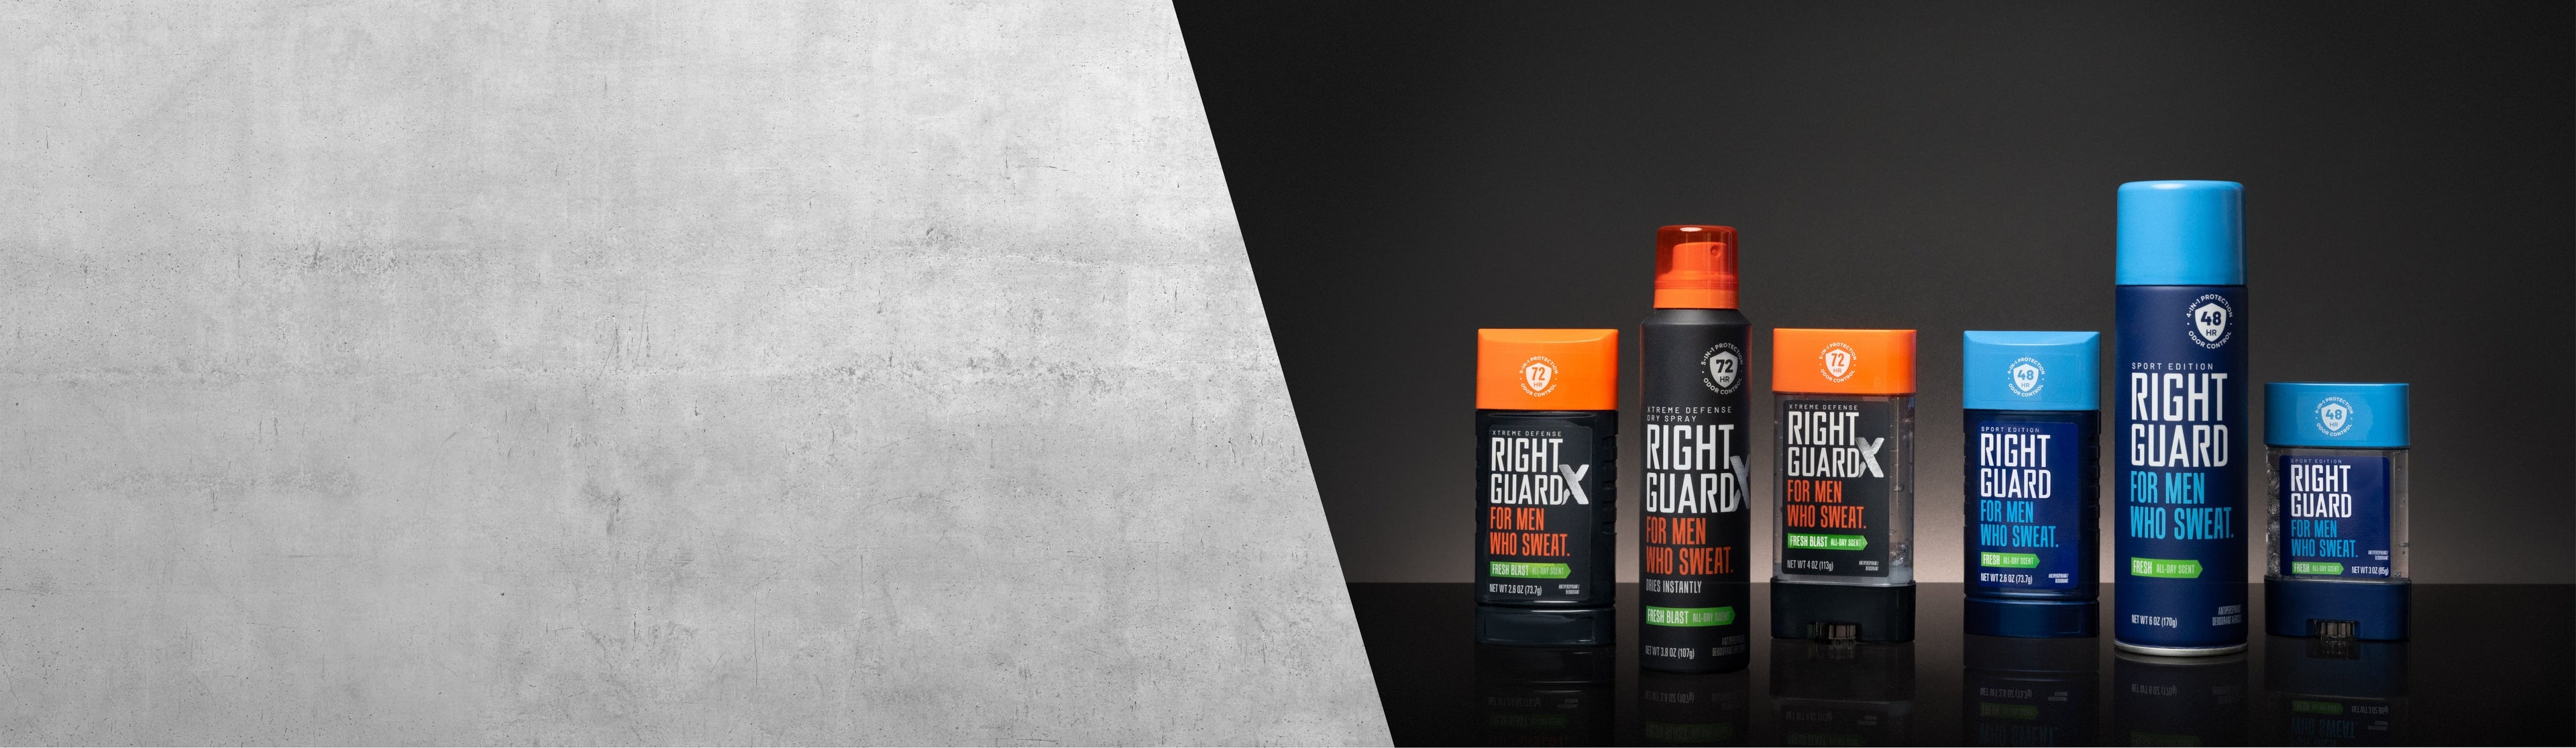 Right Guard Xtreme Defense and Sport antiperspirant and deodorant